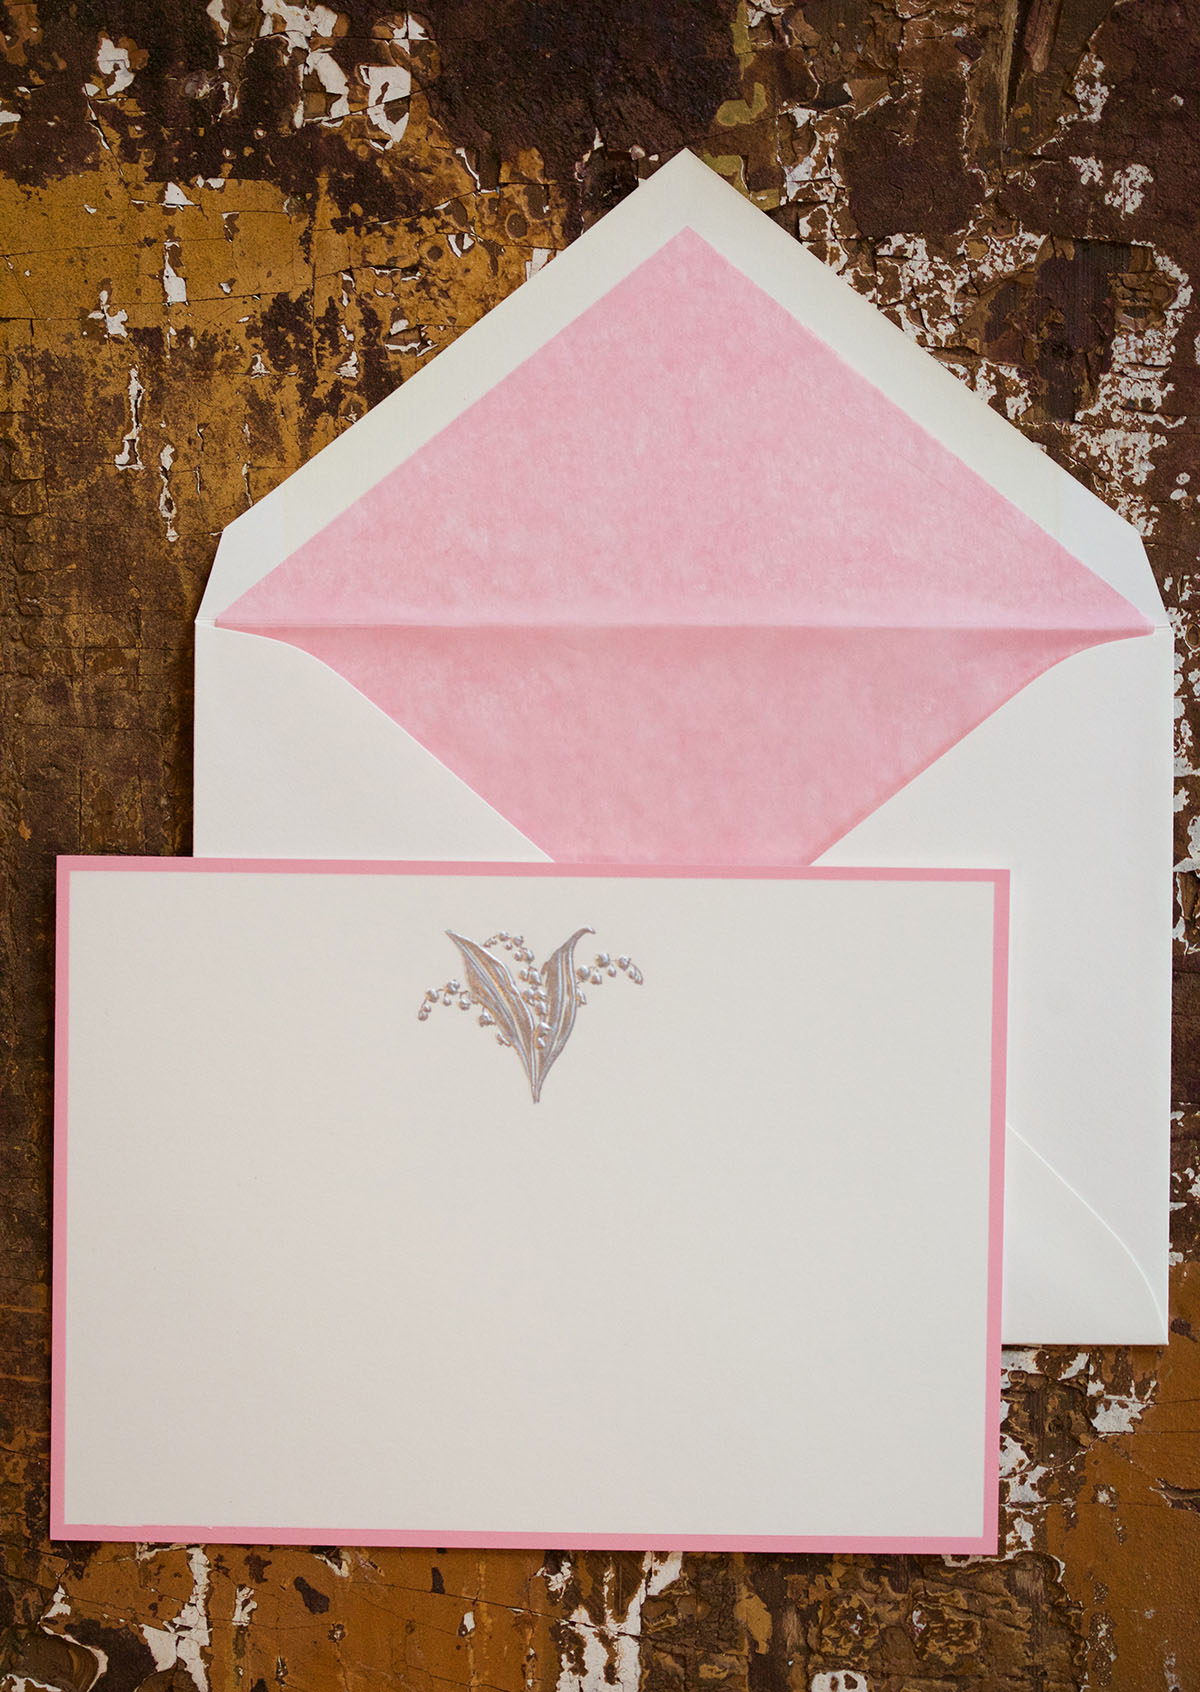 Lily of the Valley Correspondence Card 
															/ Pickett's Press							